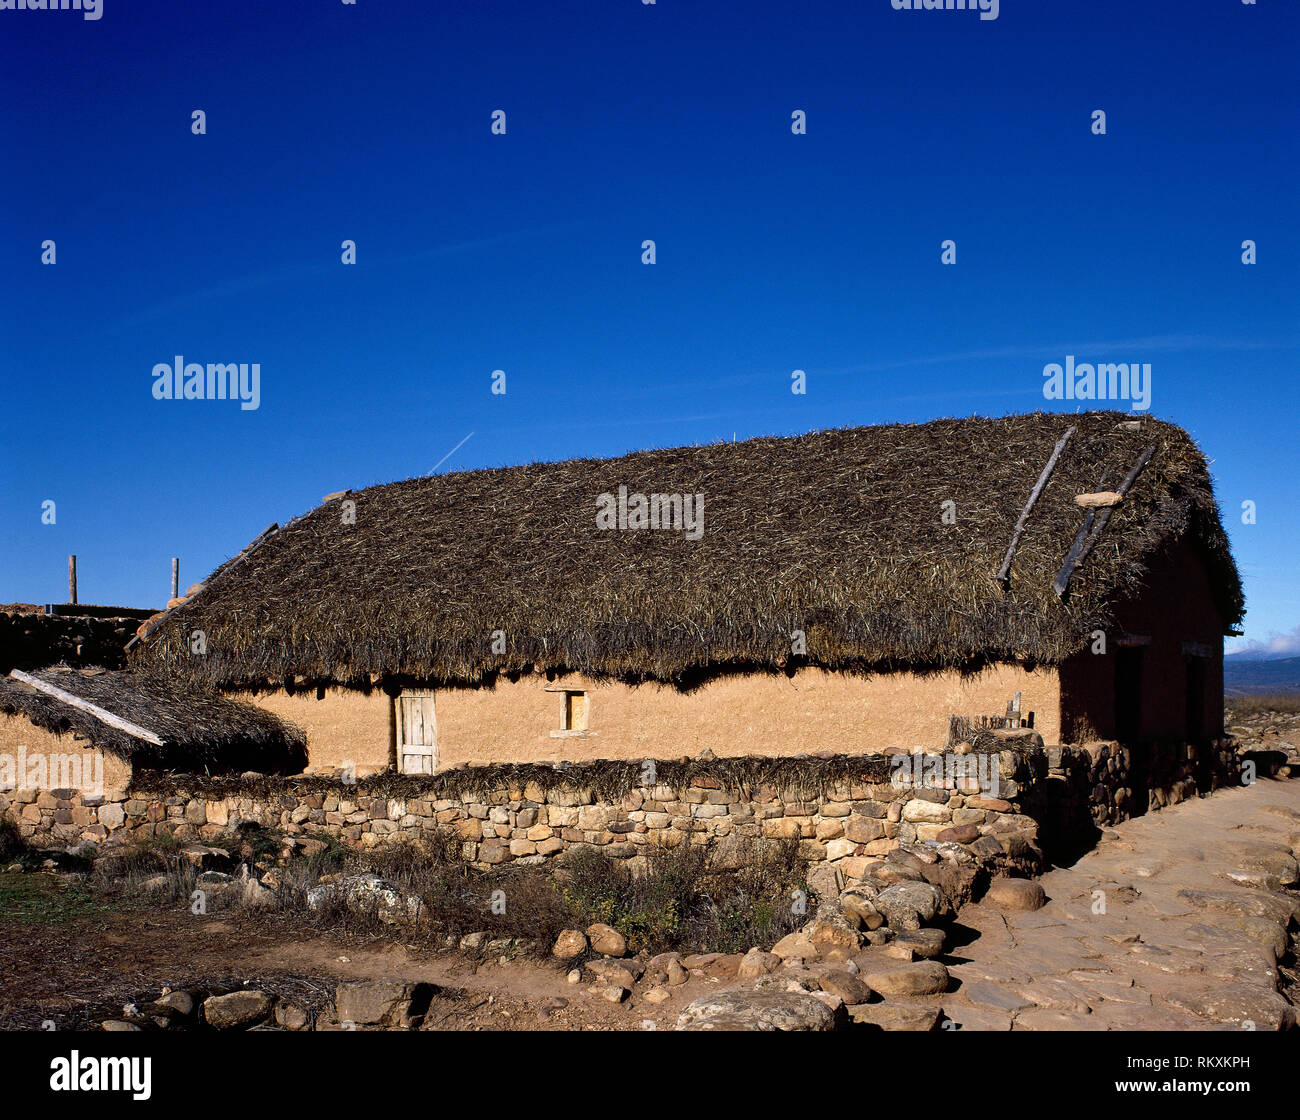 Spain. Numantia. Ancient Celtiberian town conquested by the Romans in 133 BC, during the Celtiberian Wars. It was abandoned in the 4th century AD. Modern reconstruction of a Celtiberian house, with reinforcements of wooden poles and adobes crowned by a roof of beams covered with straw. Garray, Province of Soria, Castile and Leon. Stock Photo